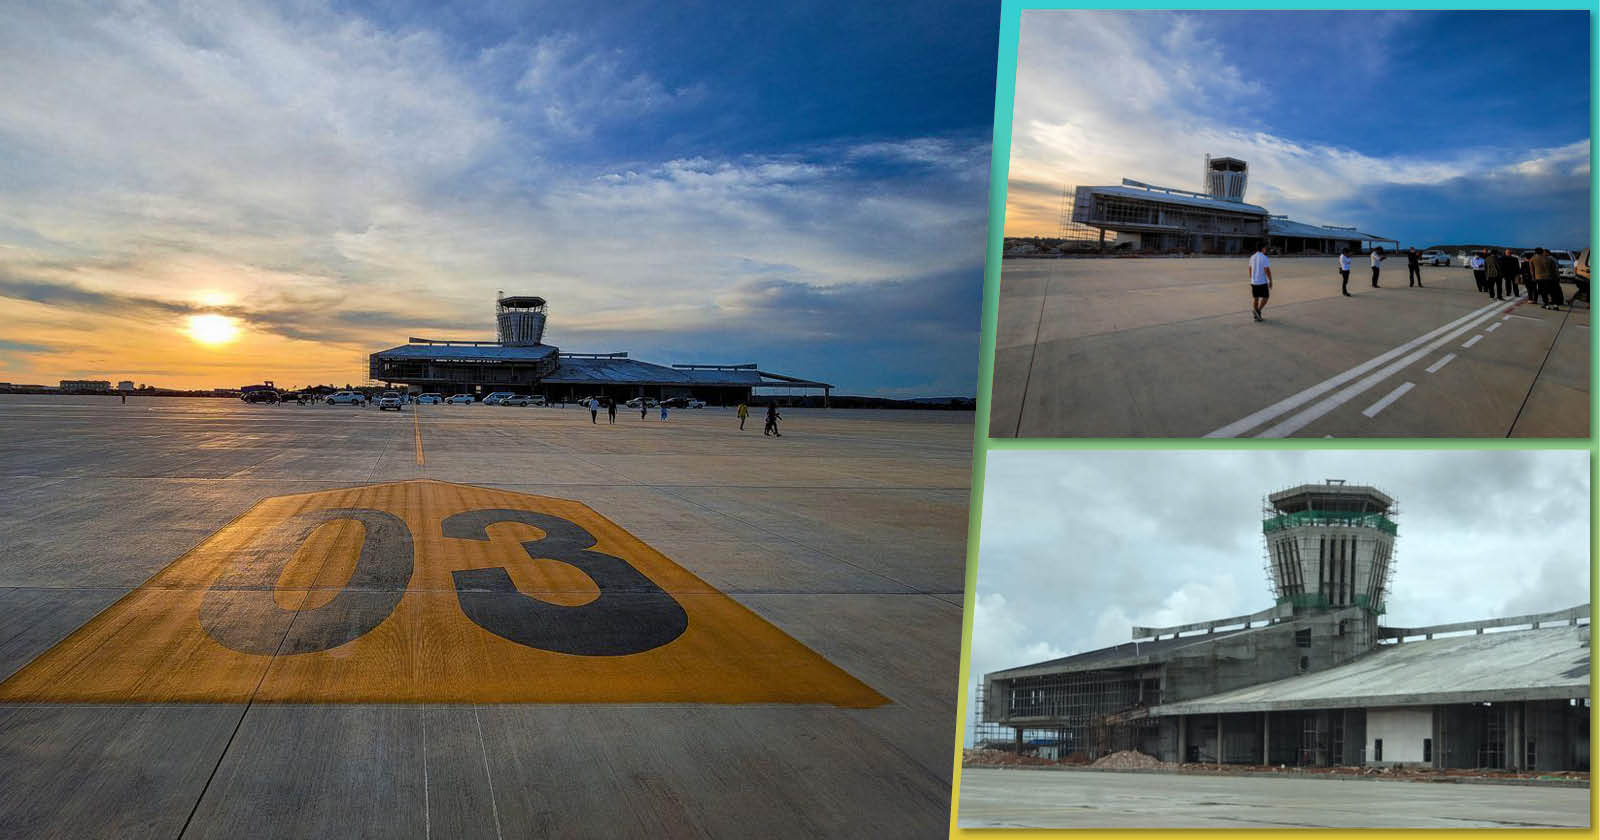 Dara Sakor Airport Runway Completed, First Test Flight Scheduled for Q4 2021